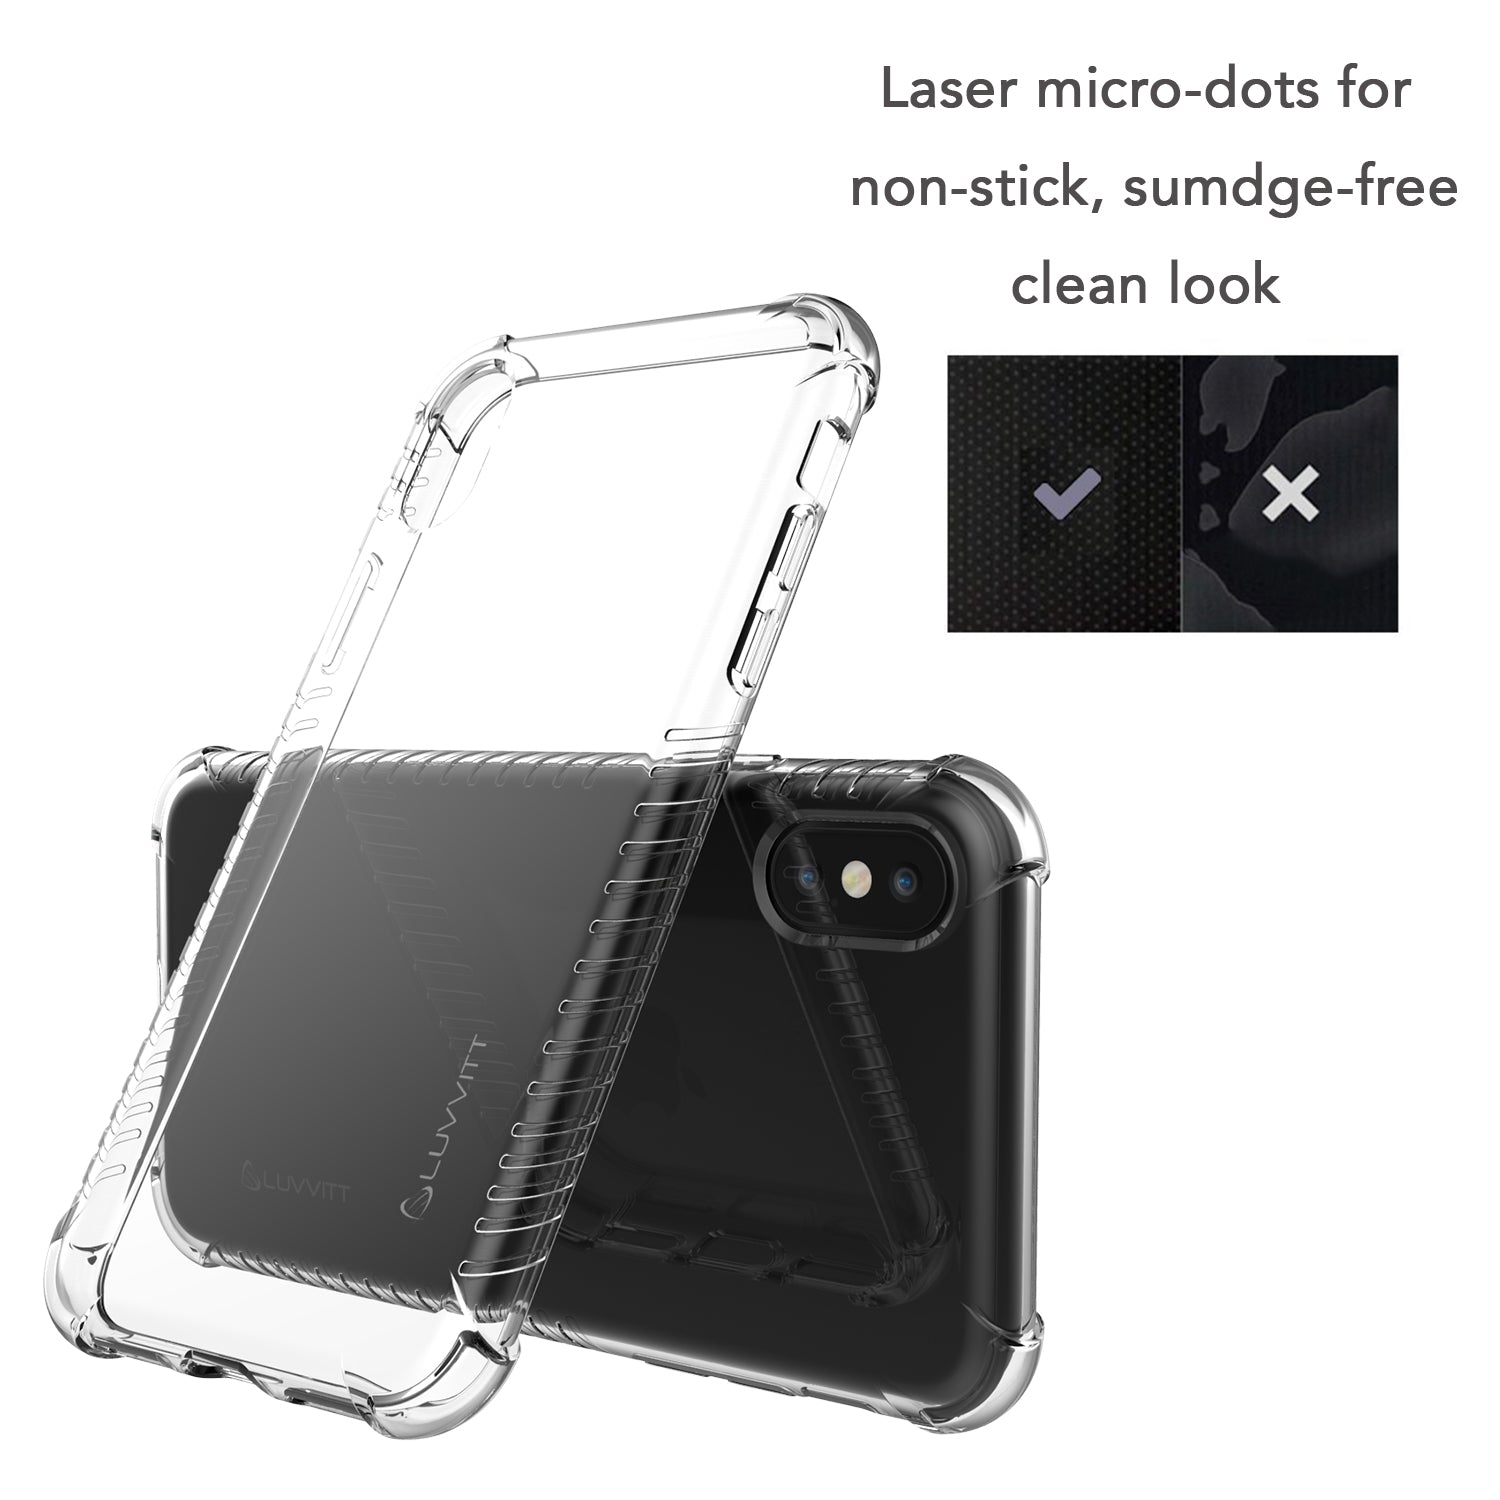 Luvvitt Clear Grip Flexible Slim Shock Proof TPU Case for Apple iPhone X / XS - Clear